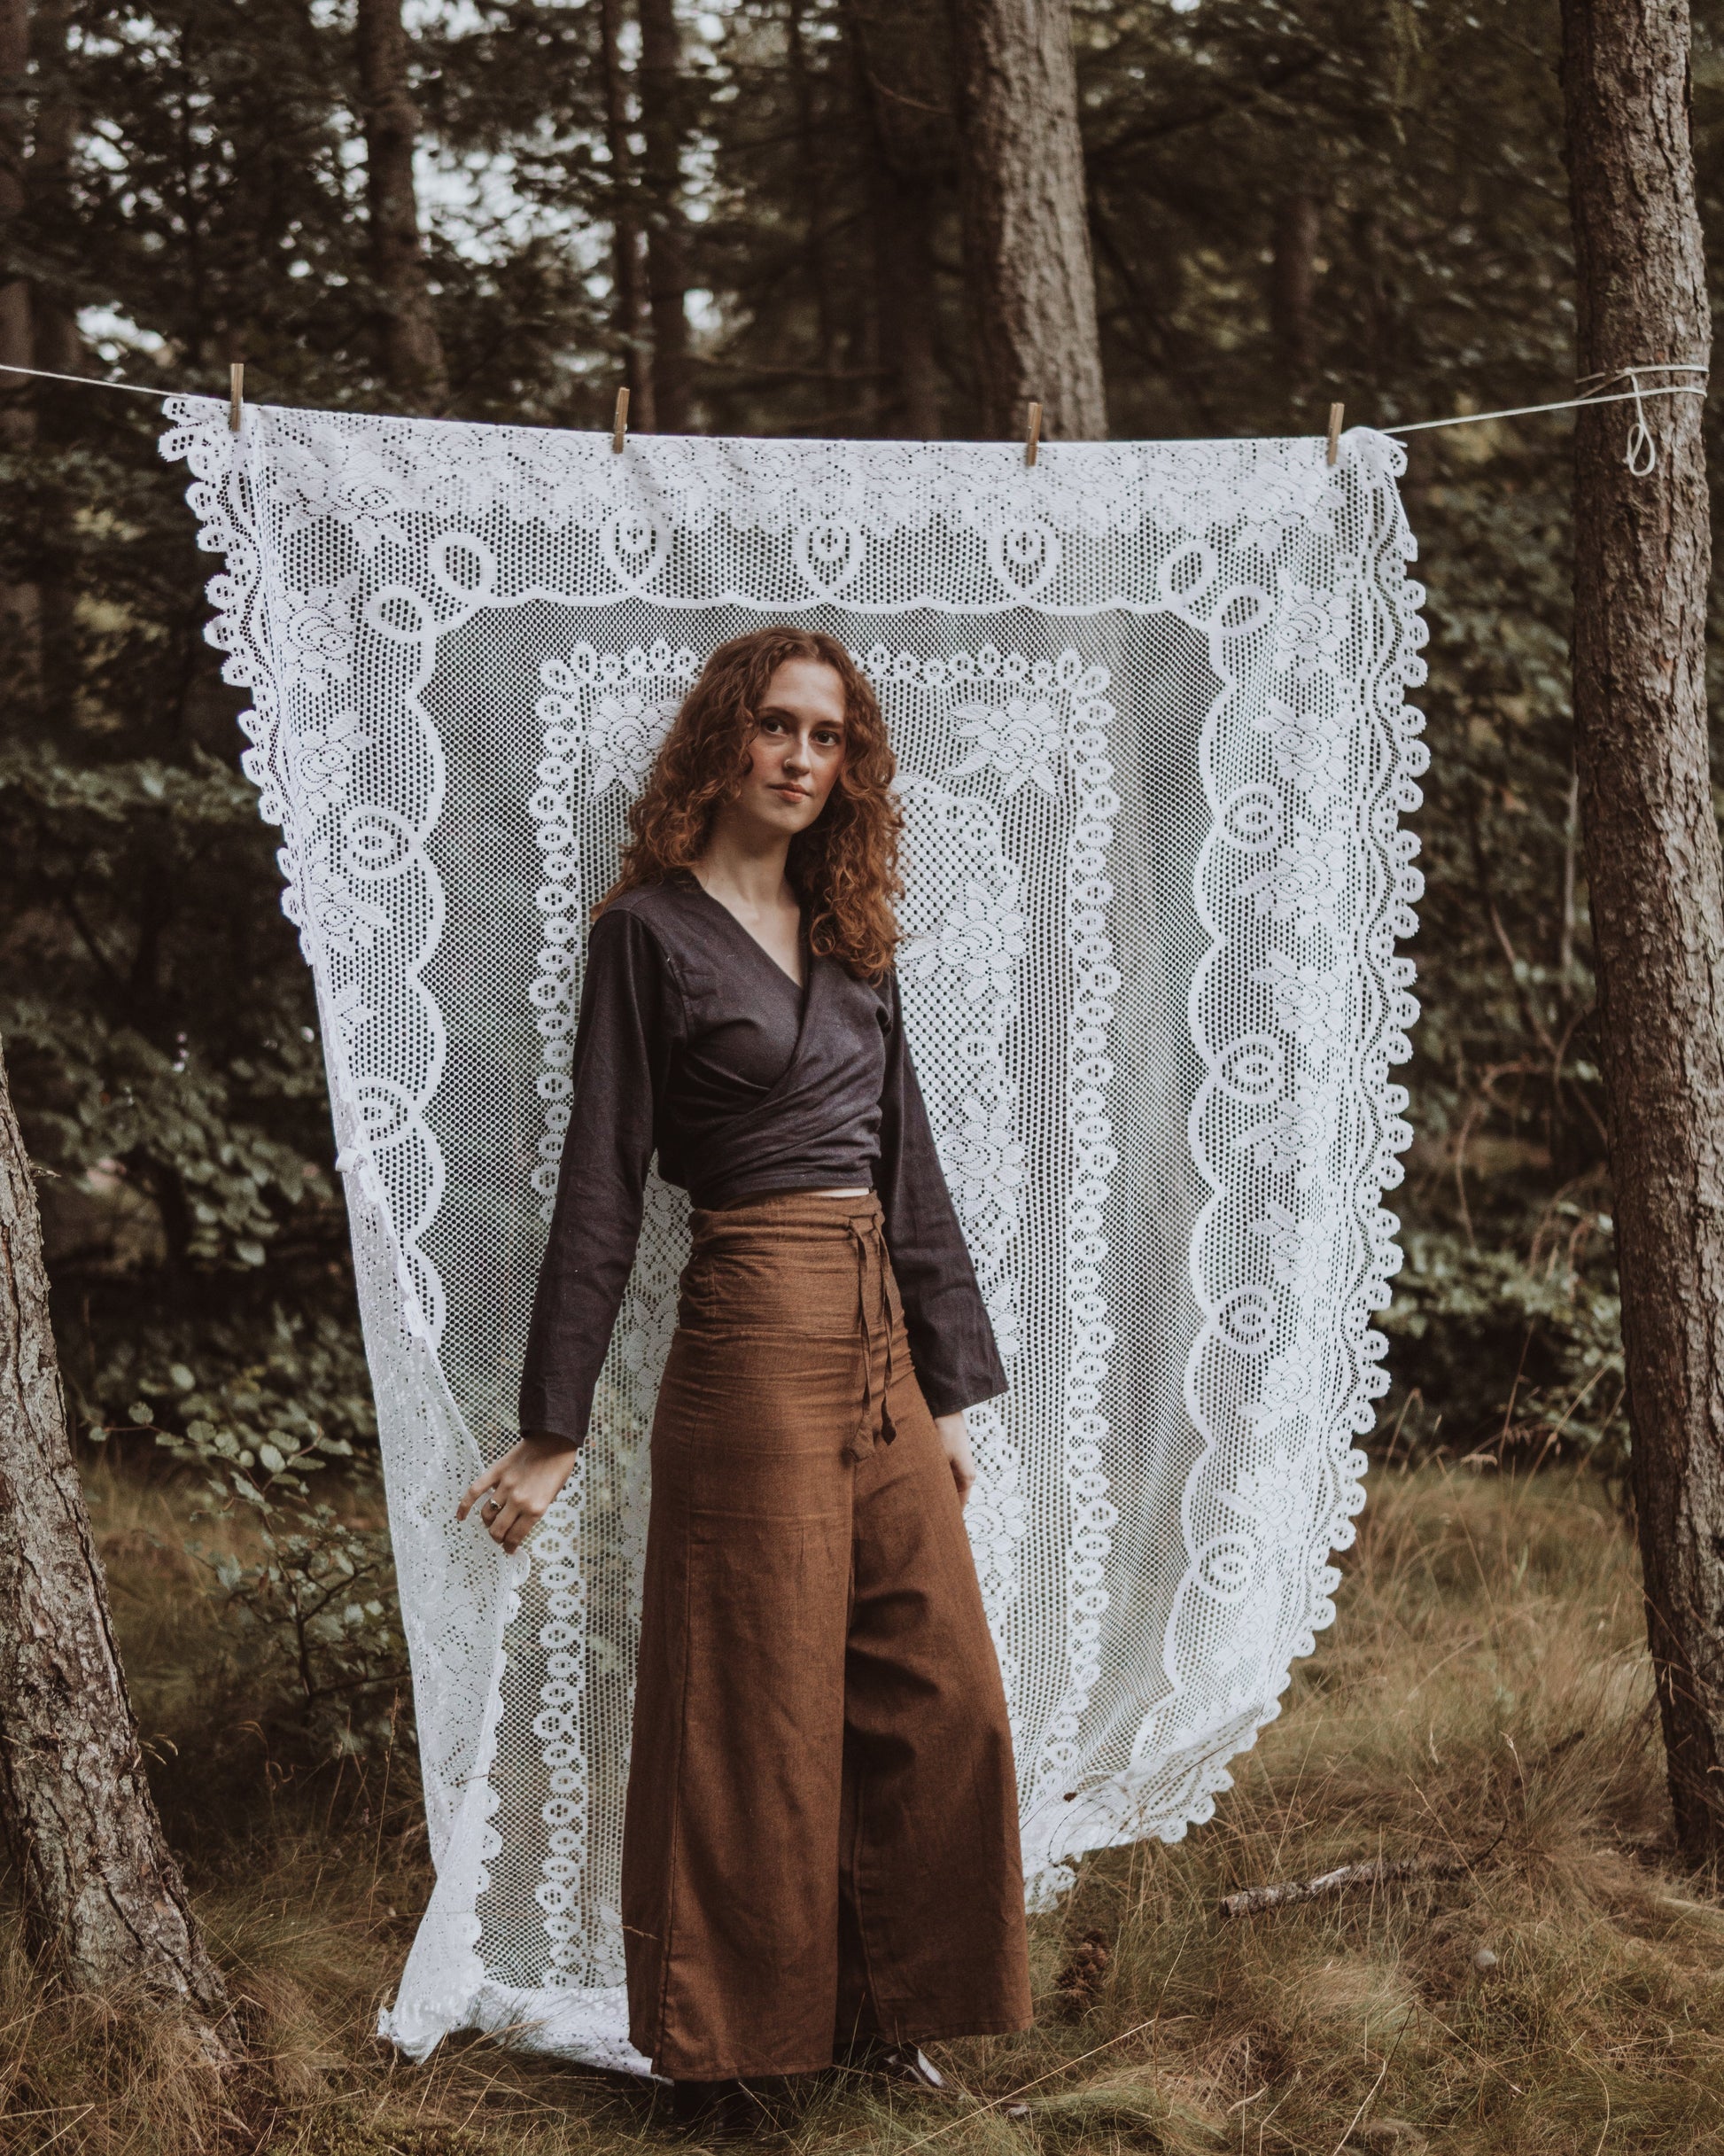 Clothing & Accessories > Clothing > Shirts & Tops Women's Hemp Trousers - Brown Hemp & Hope ethical sustainable handmade